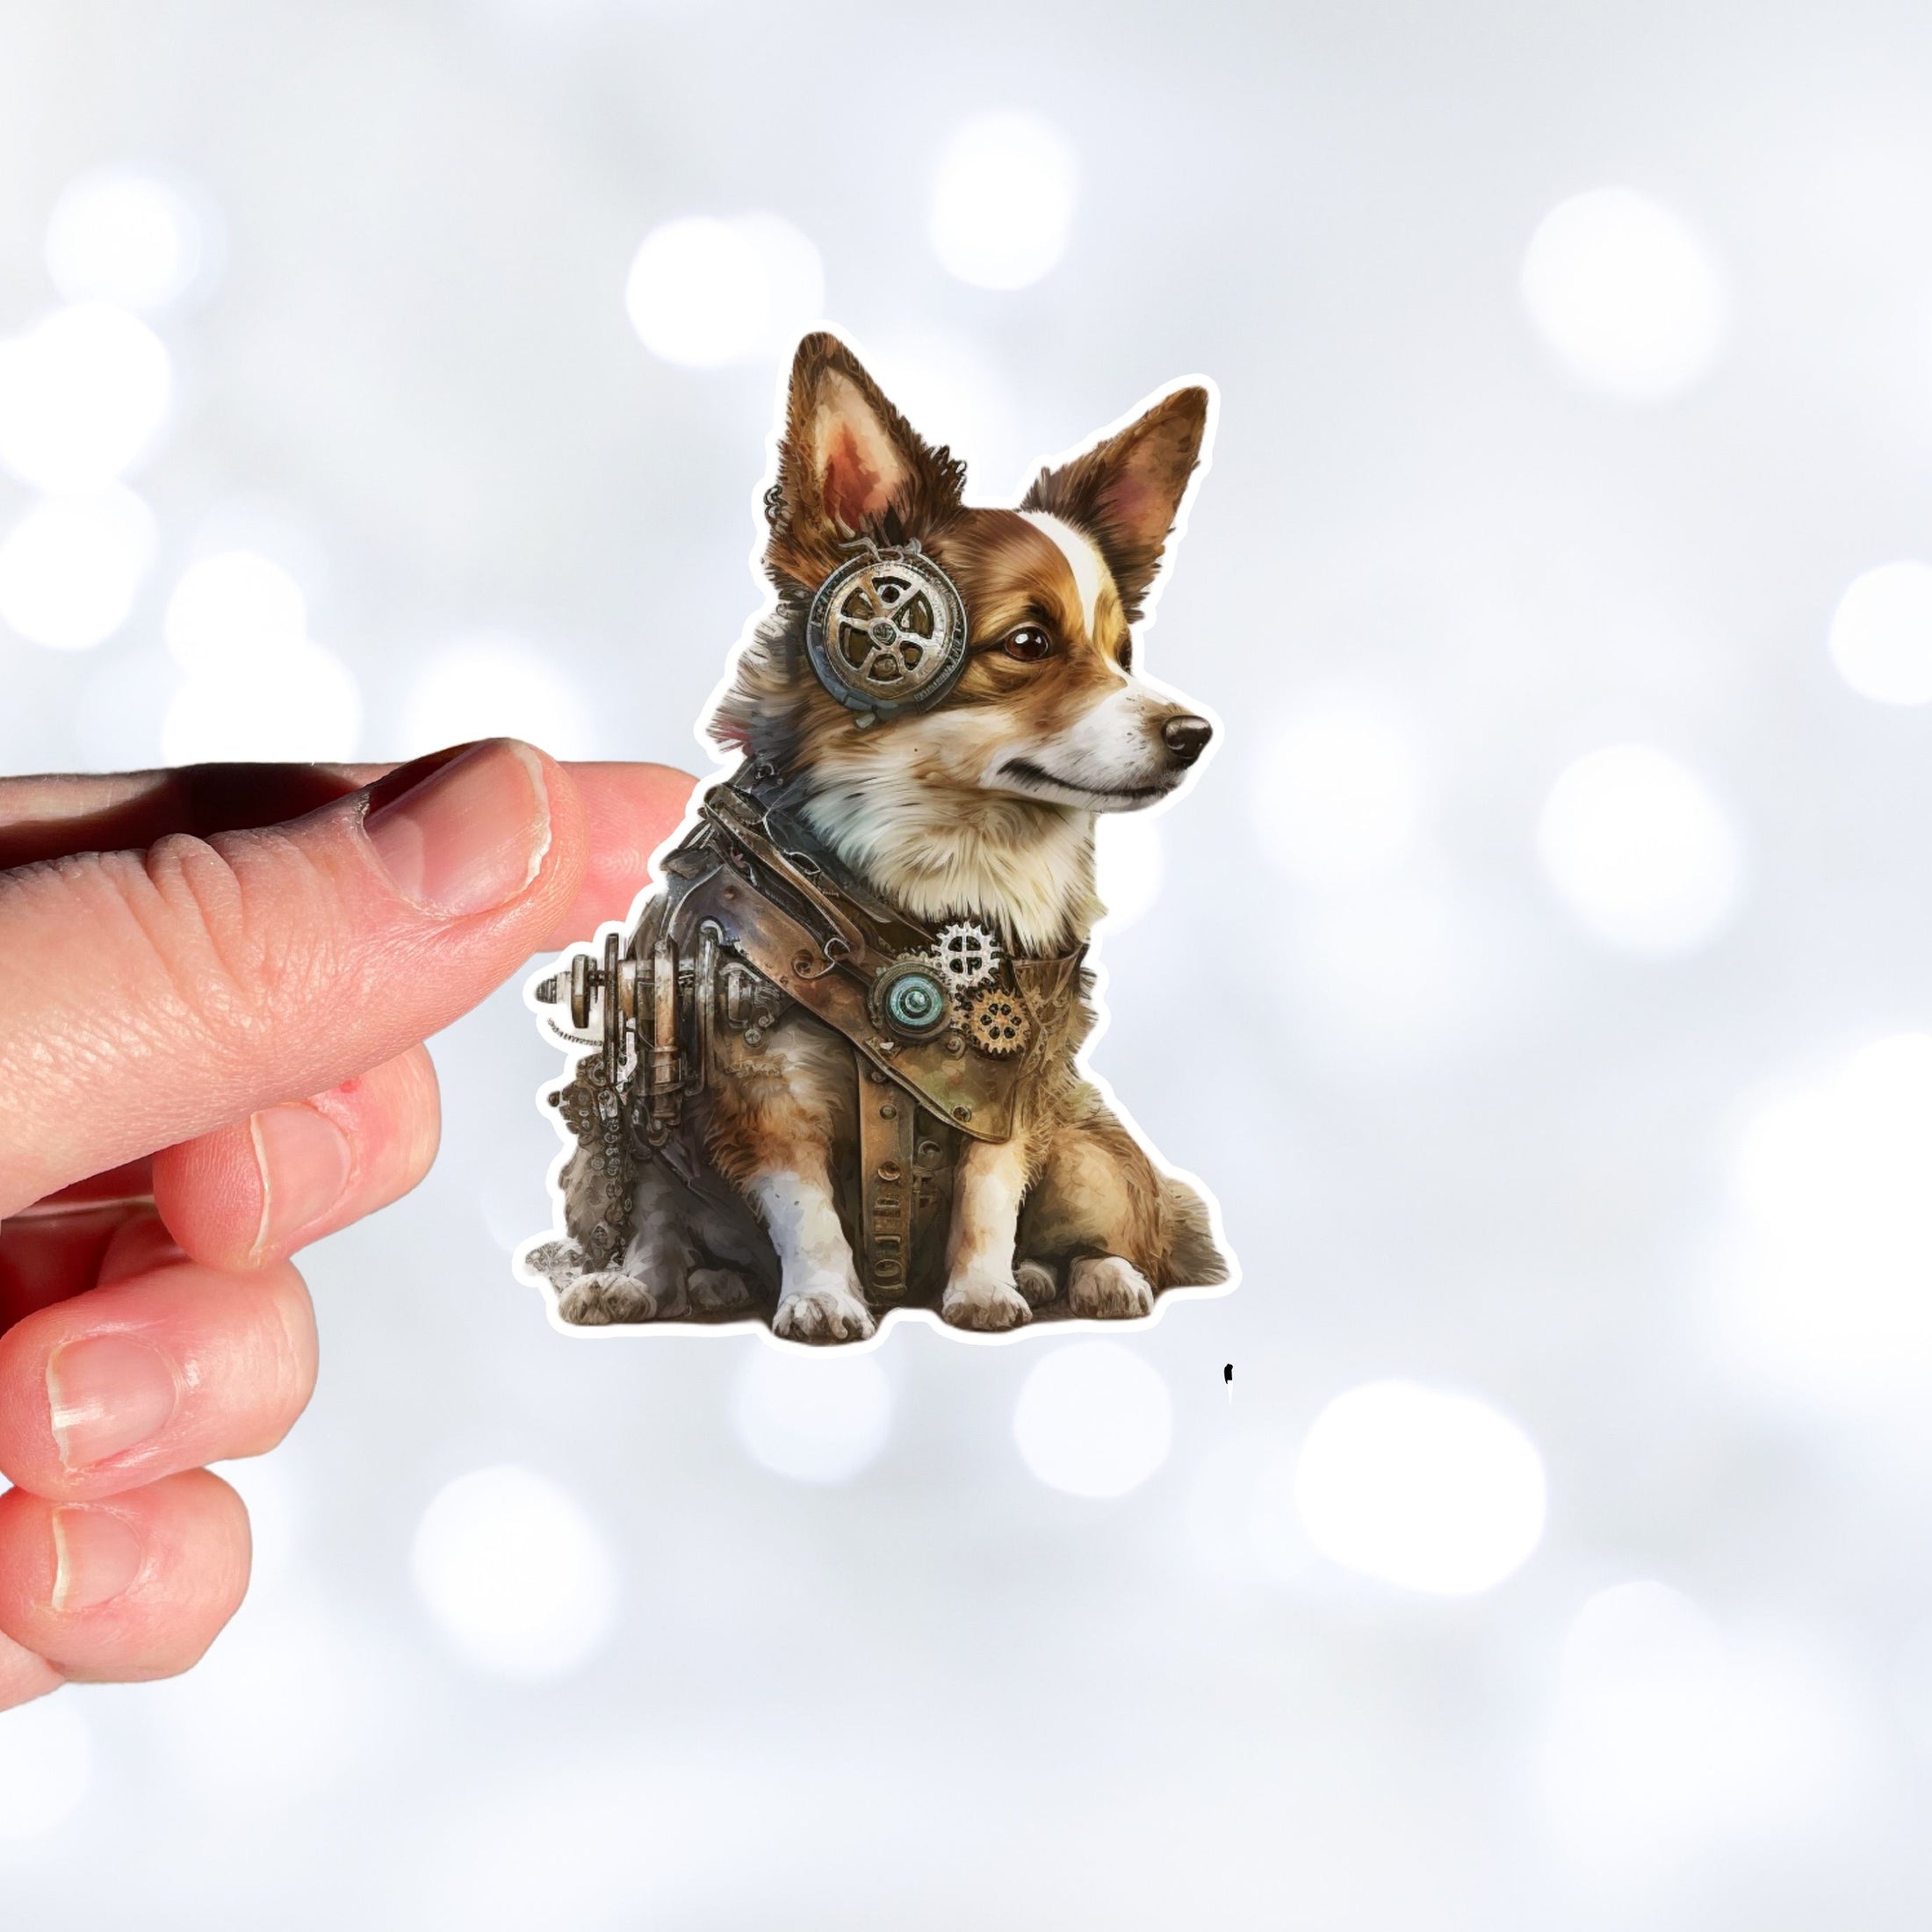 This image shows the steampunk puppy sticker being held on one finger.